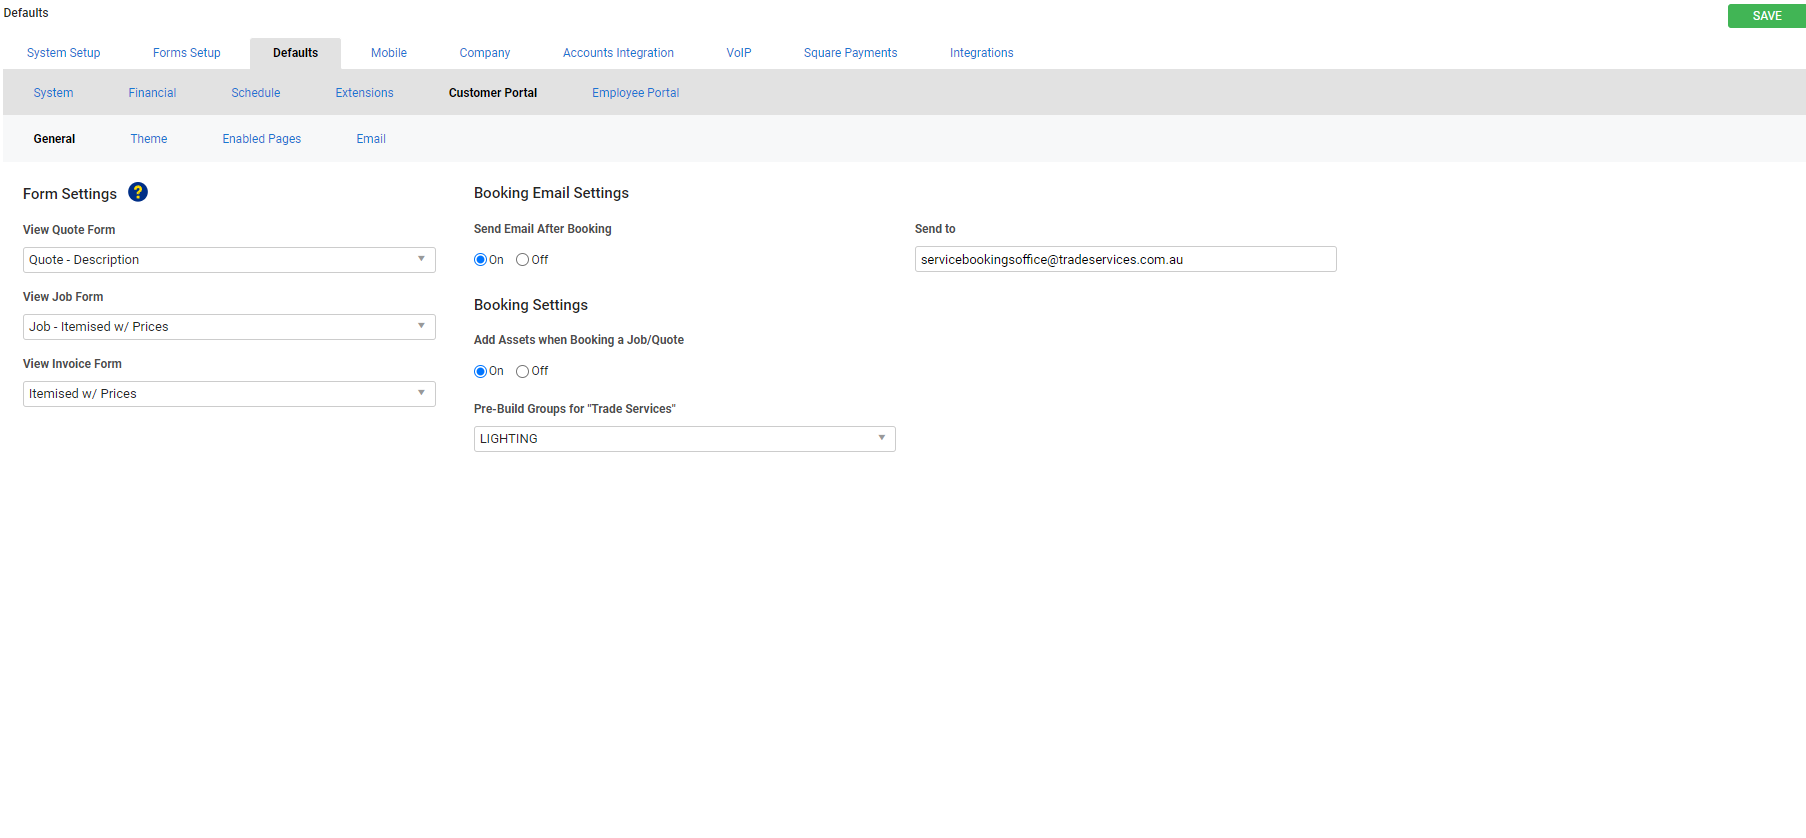 A screenshot of the general settings for the customer portal.